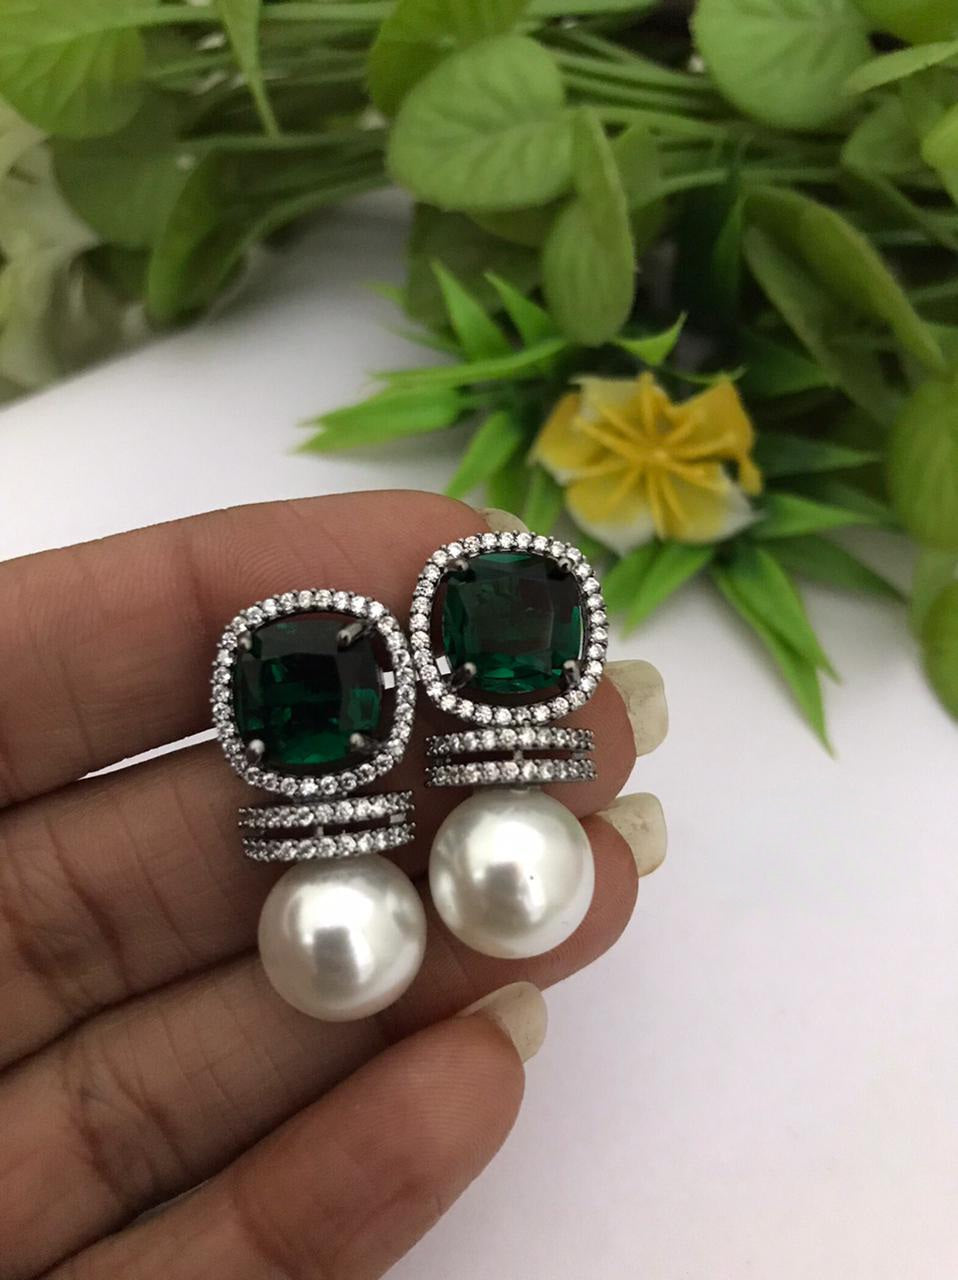 Oxidized Silver finish Real pearl stud Earrings with Green Cz stones, American Diamond Wedding bridal Stud Earrings with Fresh water pearl